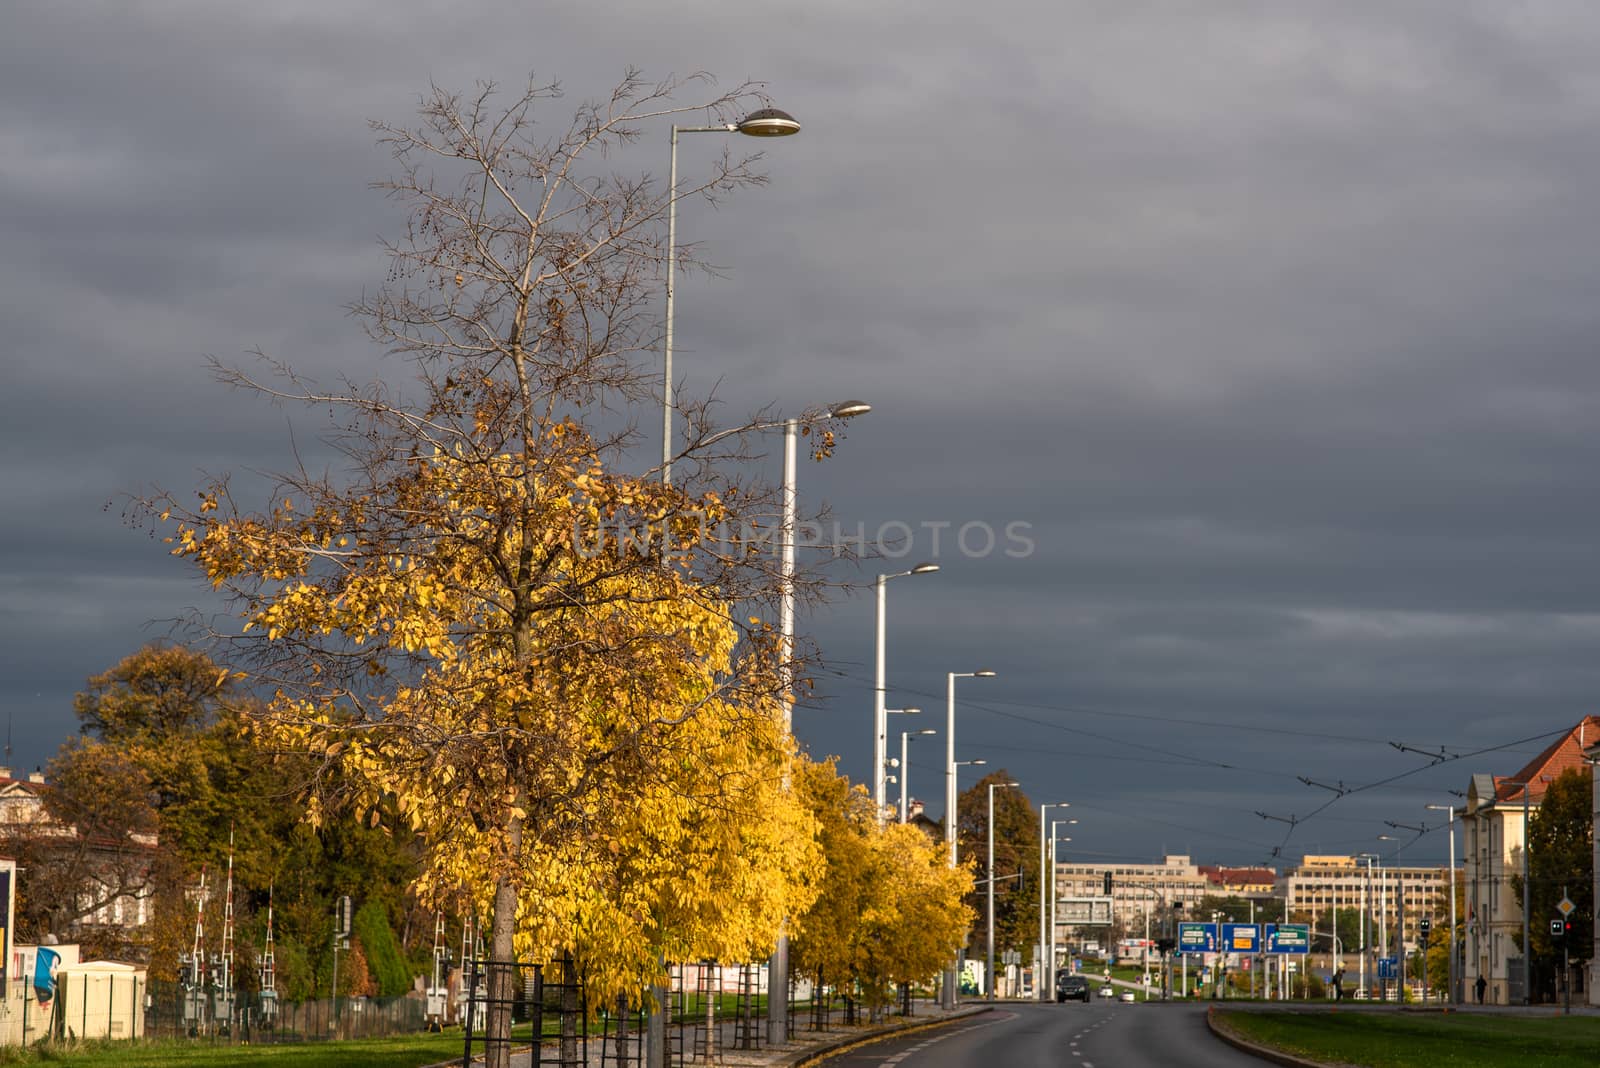 Trees with yellow leaves on a grey sky Autumn day close to a highway